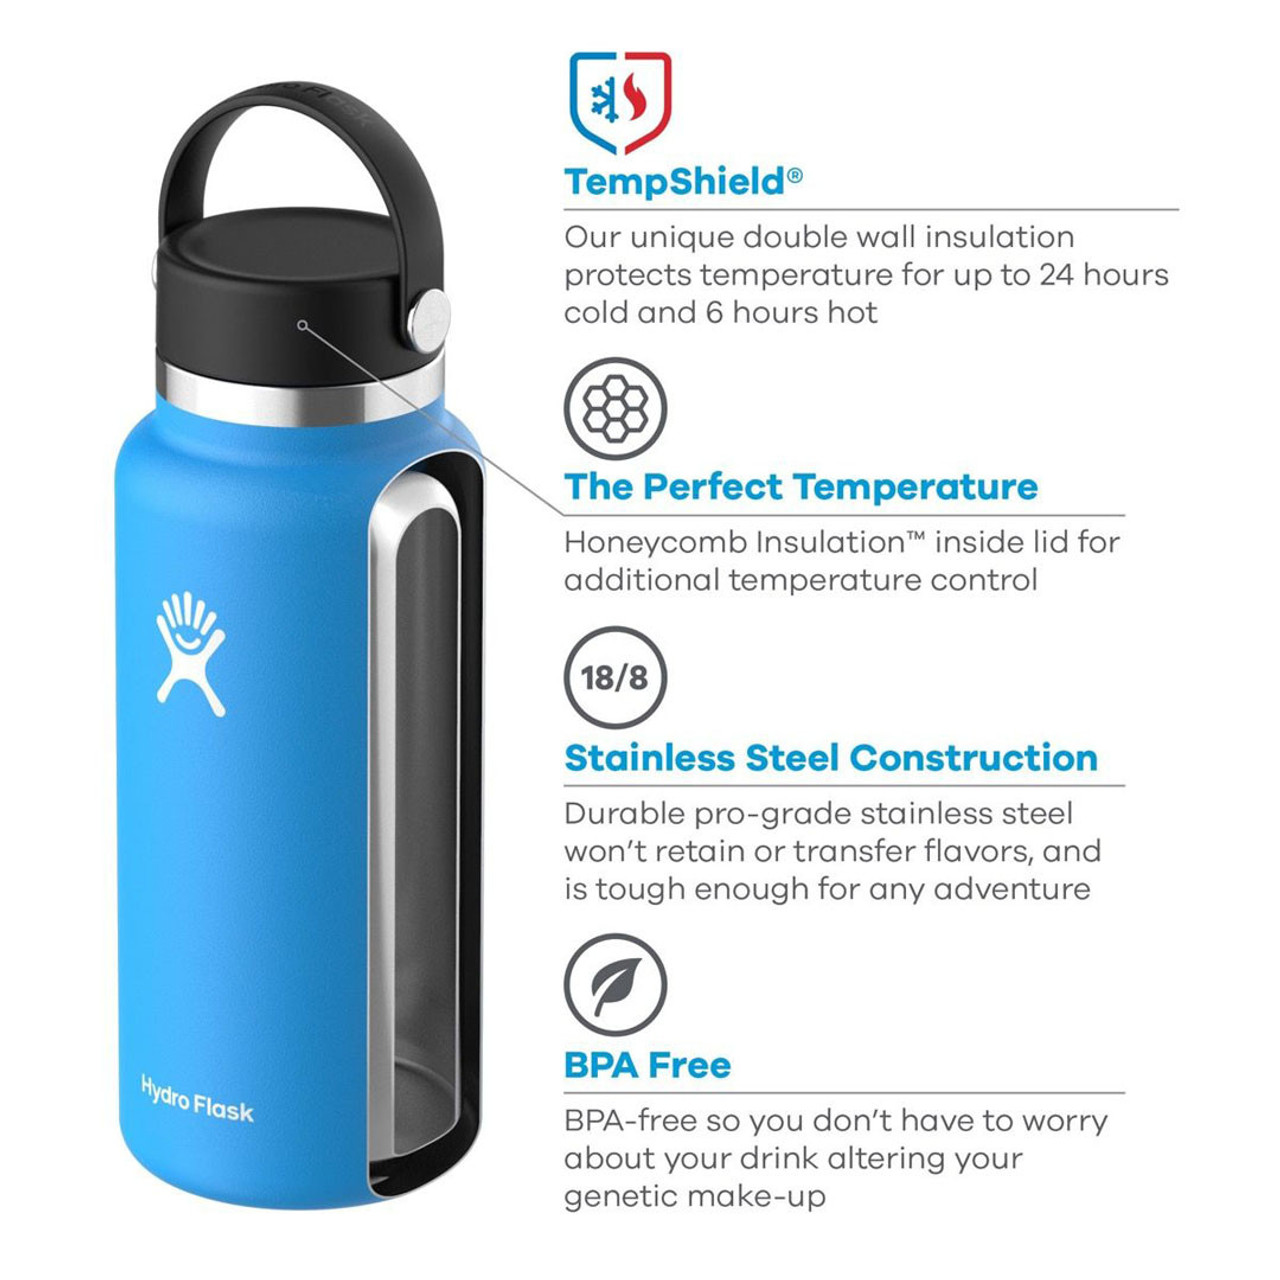 https://cdn11.bigcommerce.com/s-ppsyskcavg/images/stencil/1280x1280/products/60172/200189/hydro-flask-technology-wide-mouth2_1_1_16_1_2__79500.1659452788.1280.1280__47897.1659452861.jpg?c=2?imbypass=on